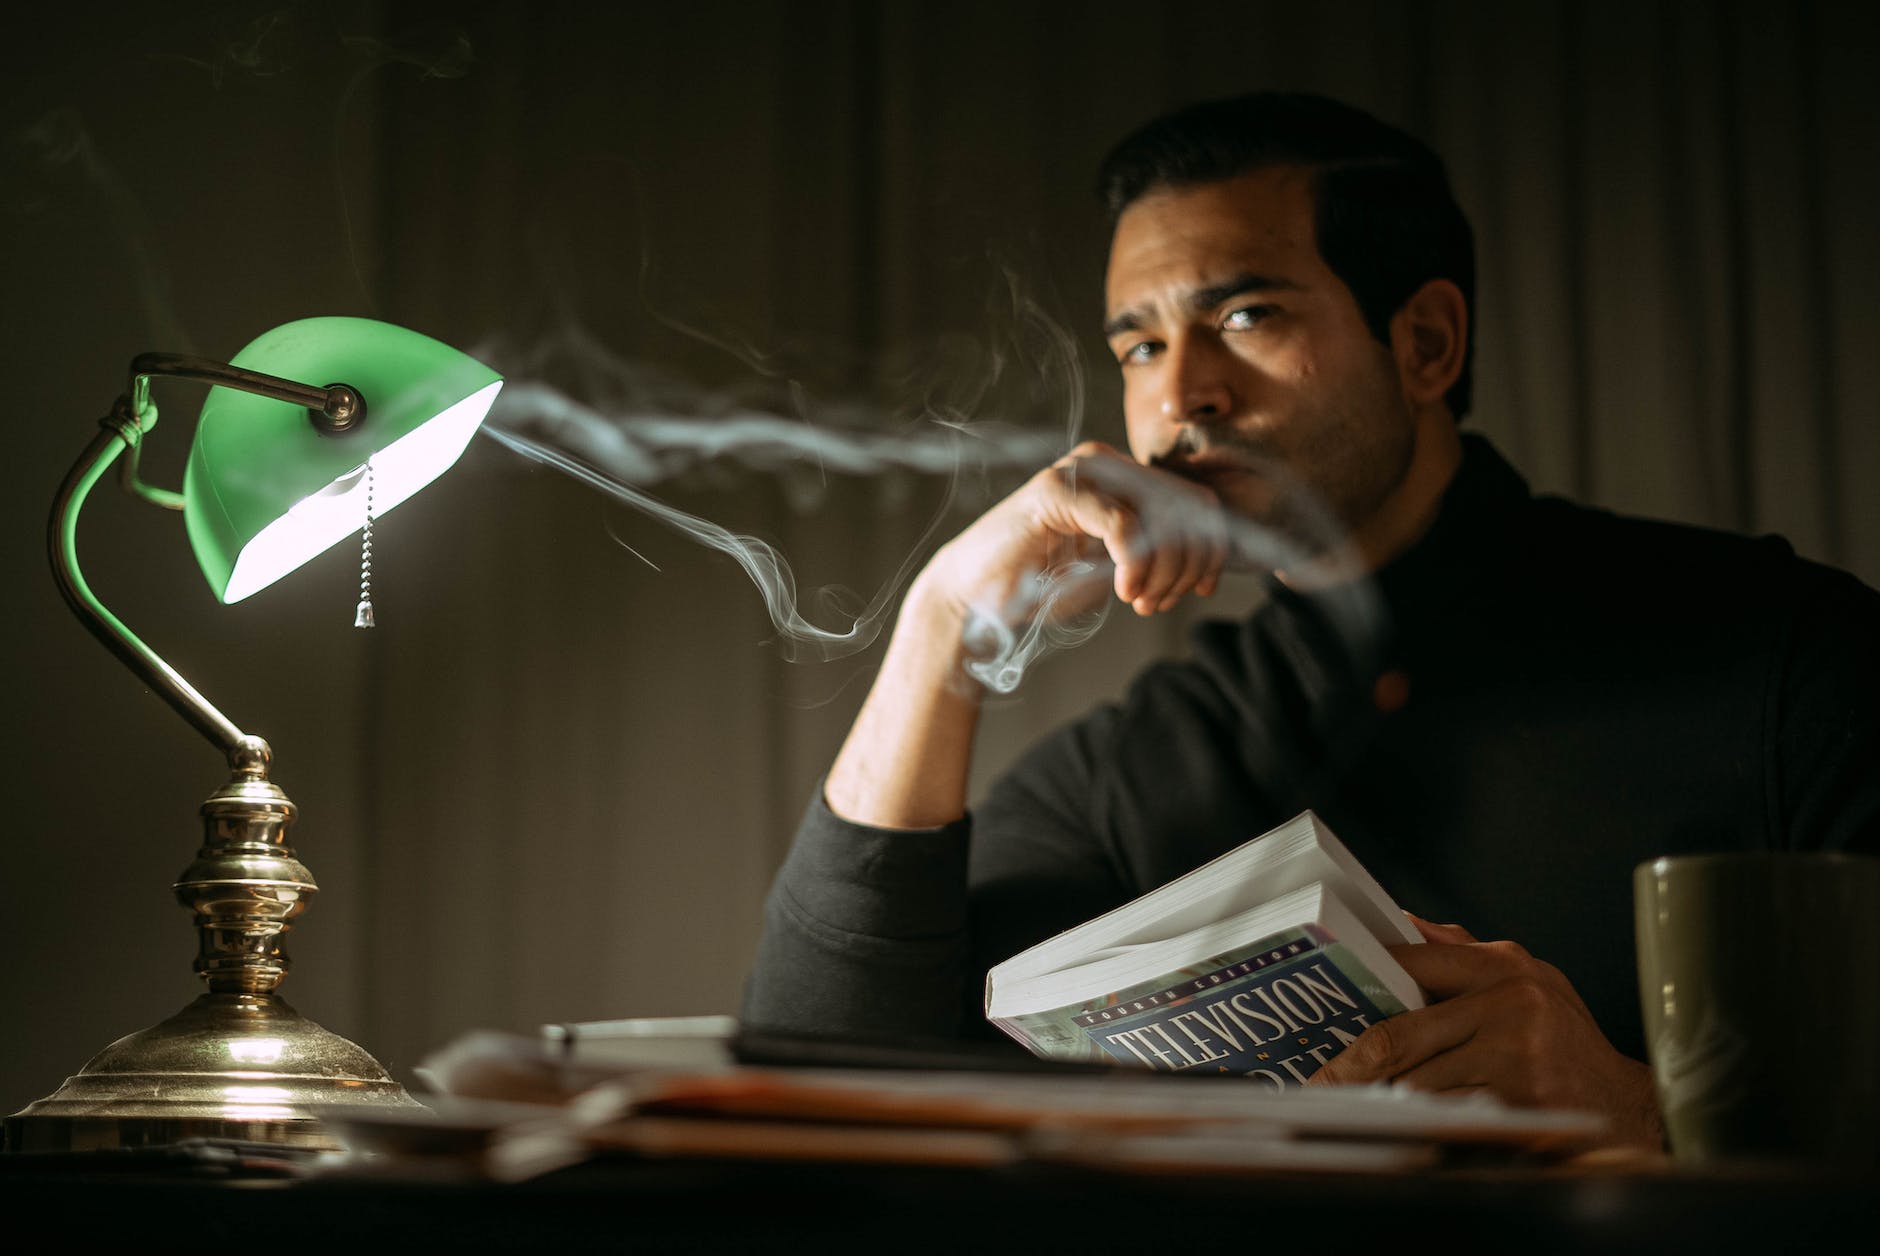 thoughtful man with book sitting in dark room